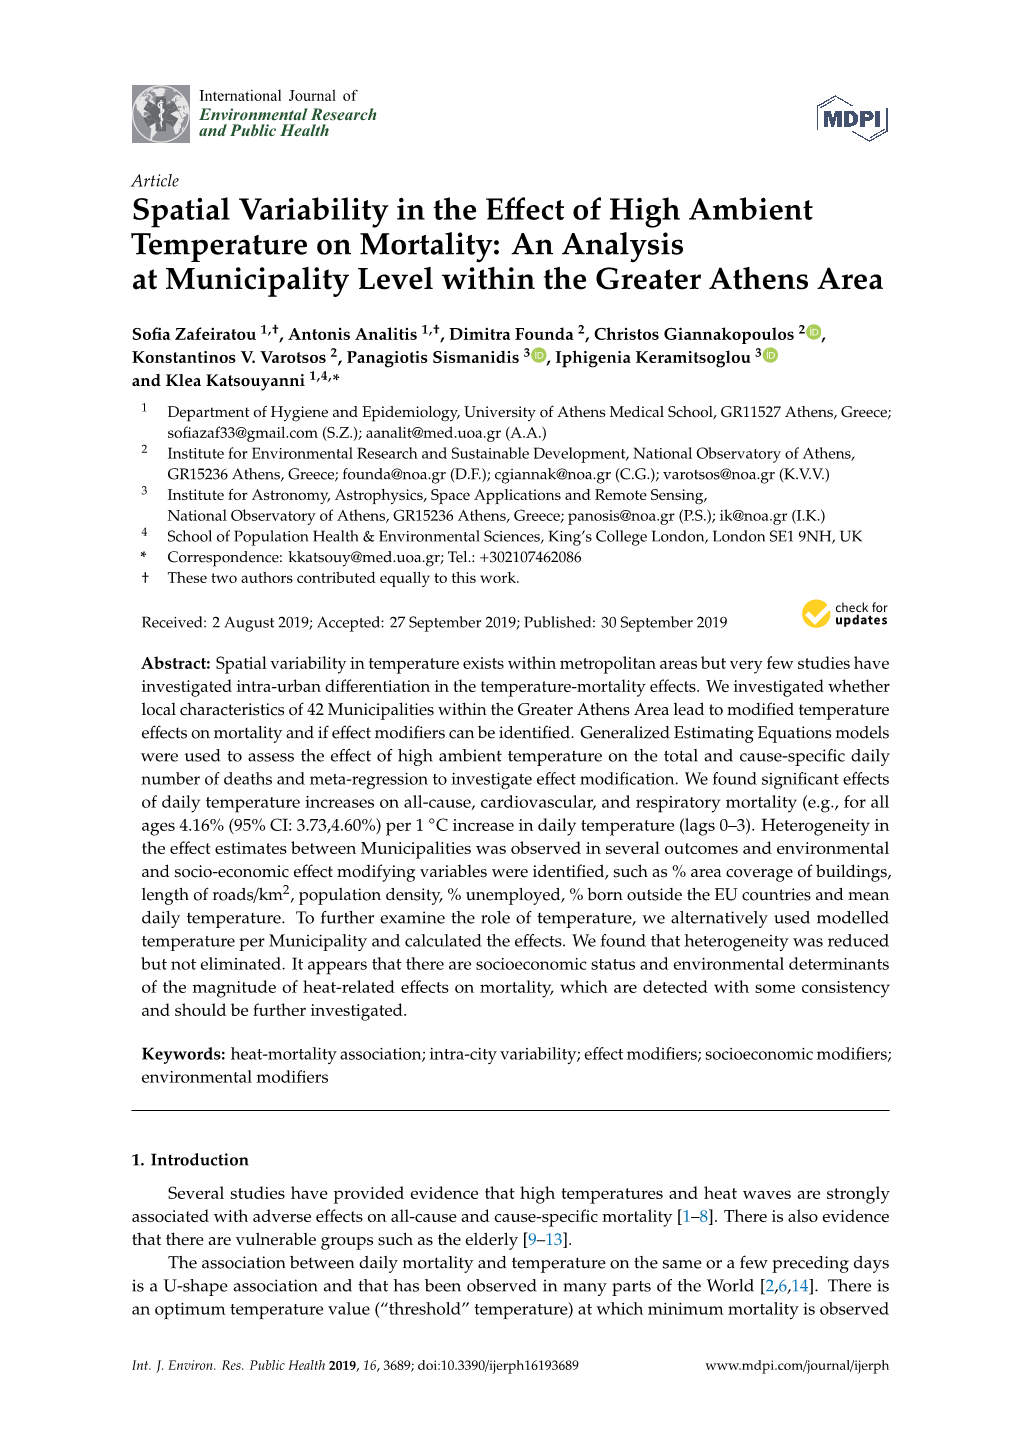 Spatial Variability in the Effect of High Ambient Temperature on Mortality